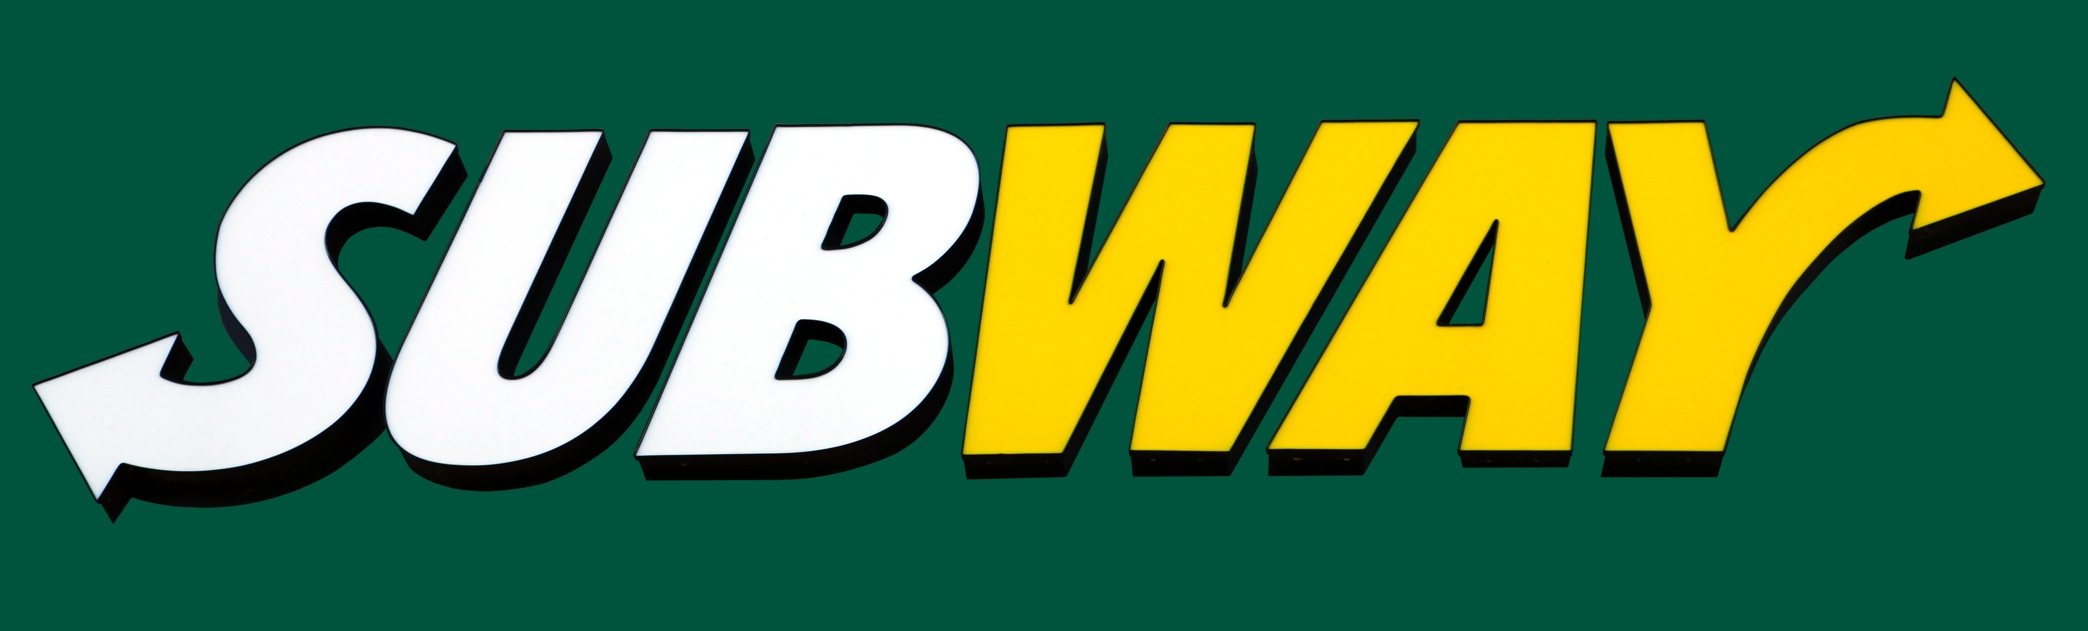 Subway opens its doors on campus